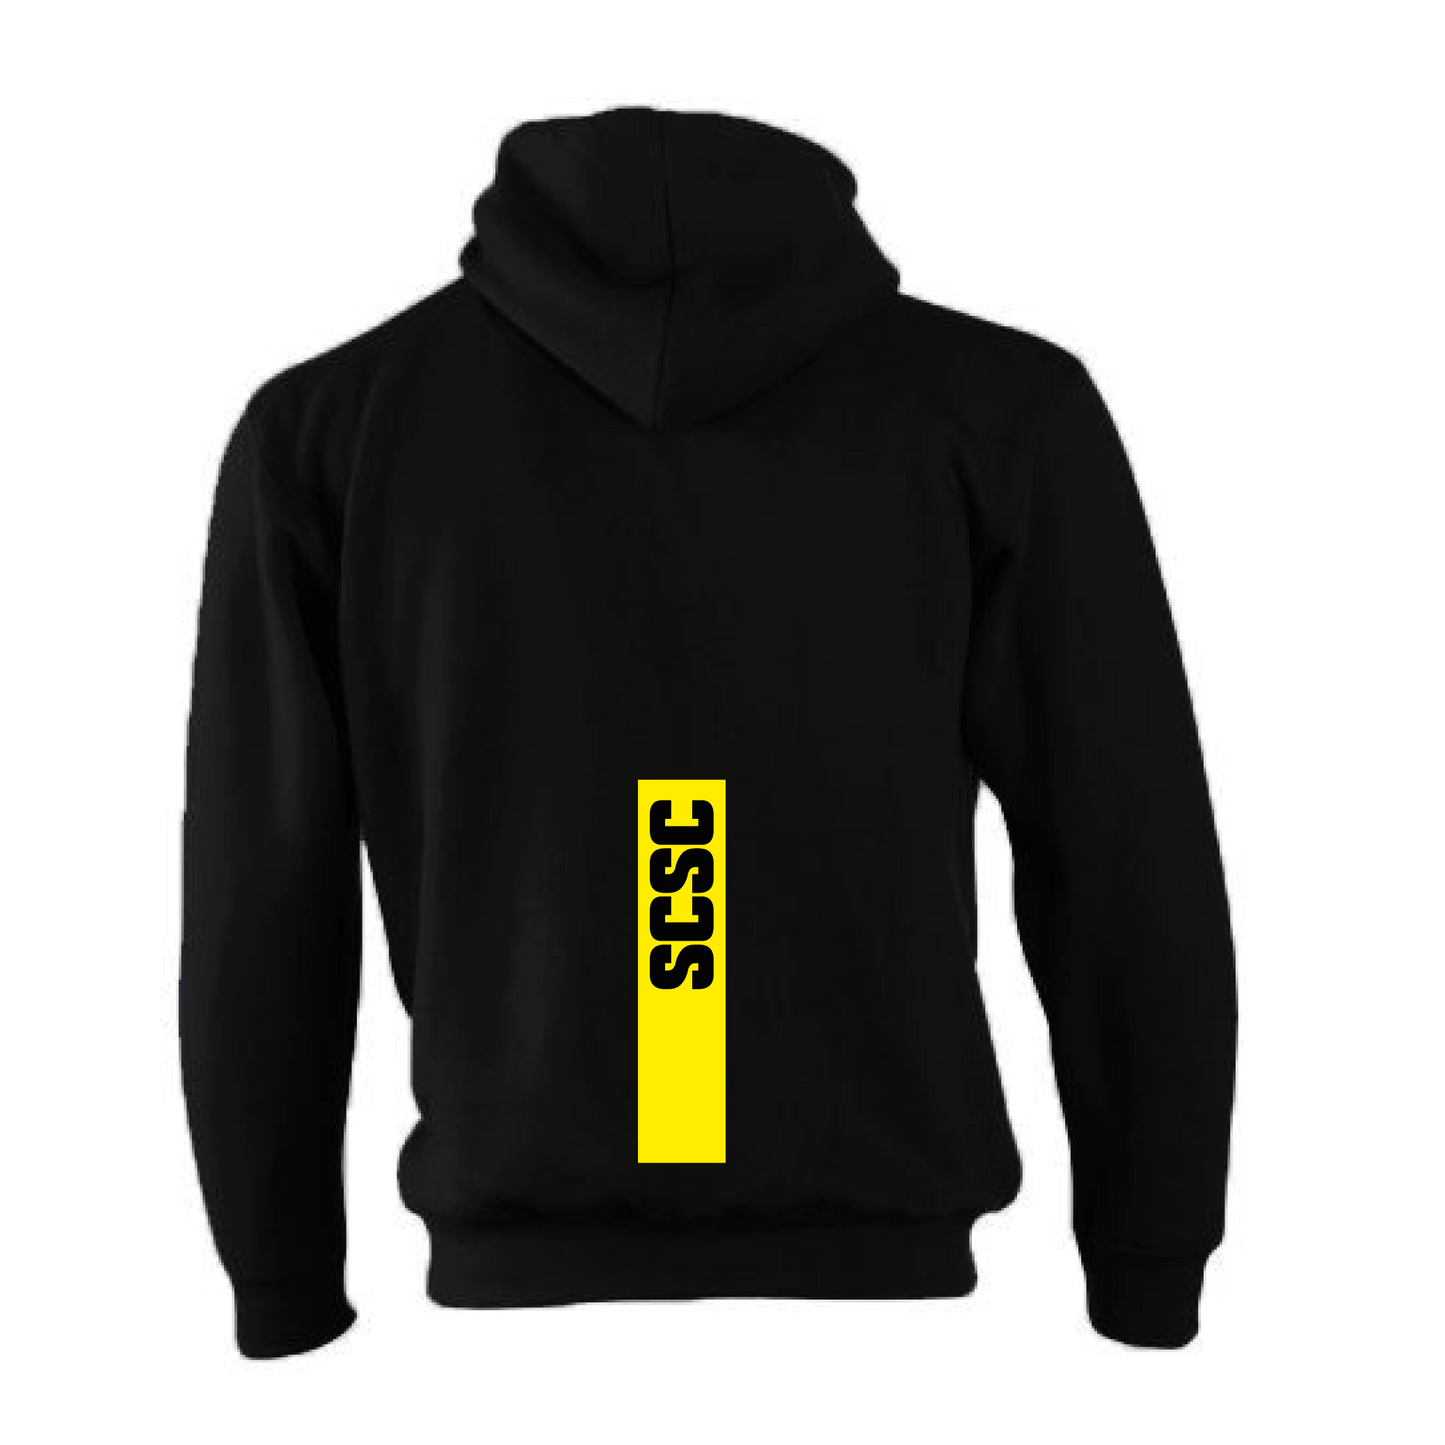 The Club Hoody - SCSC